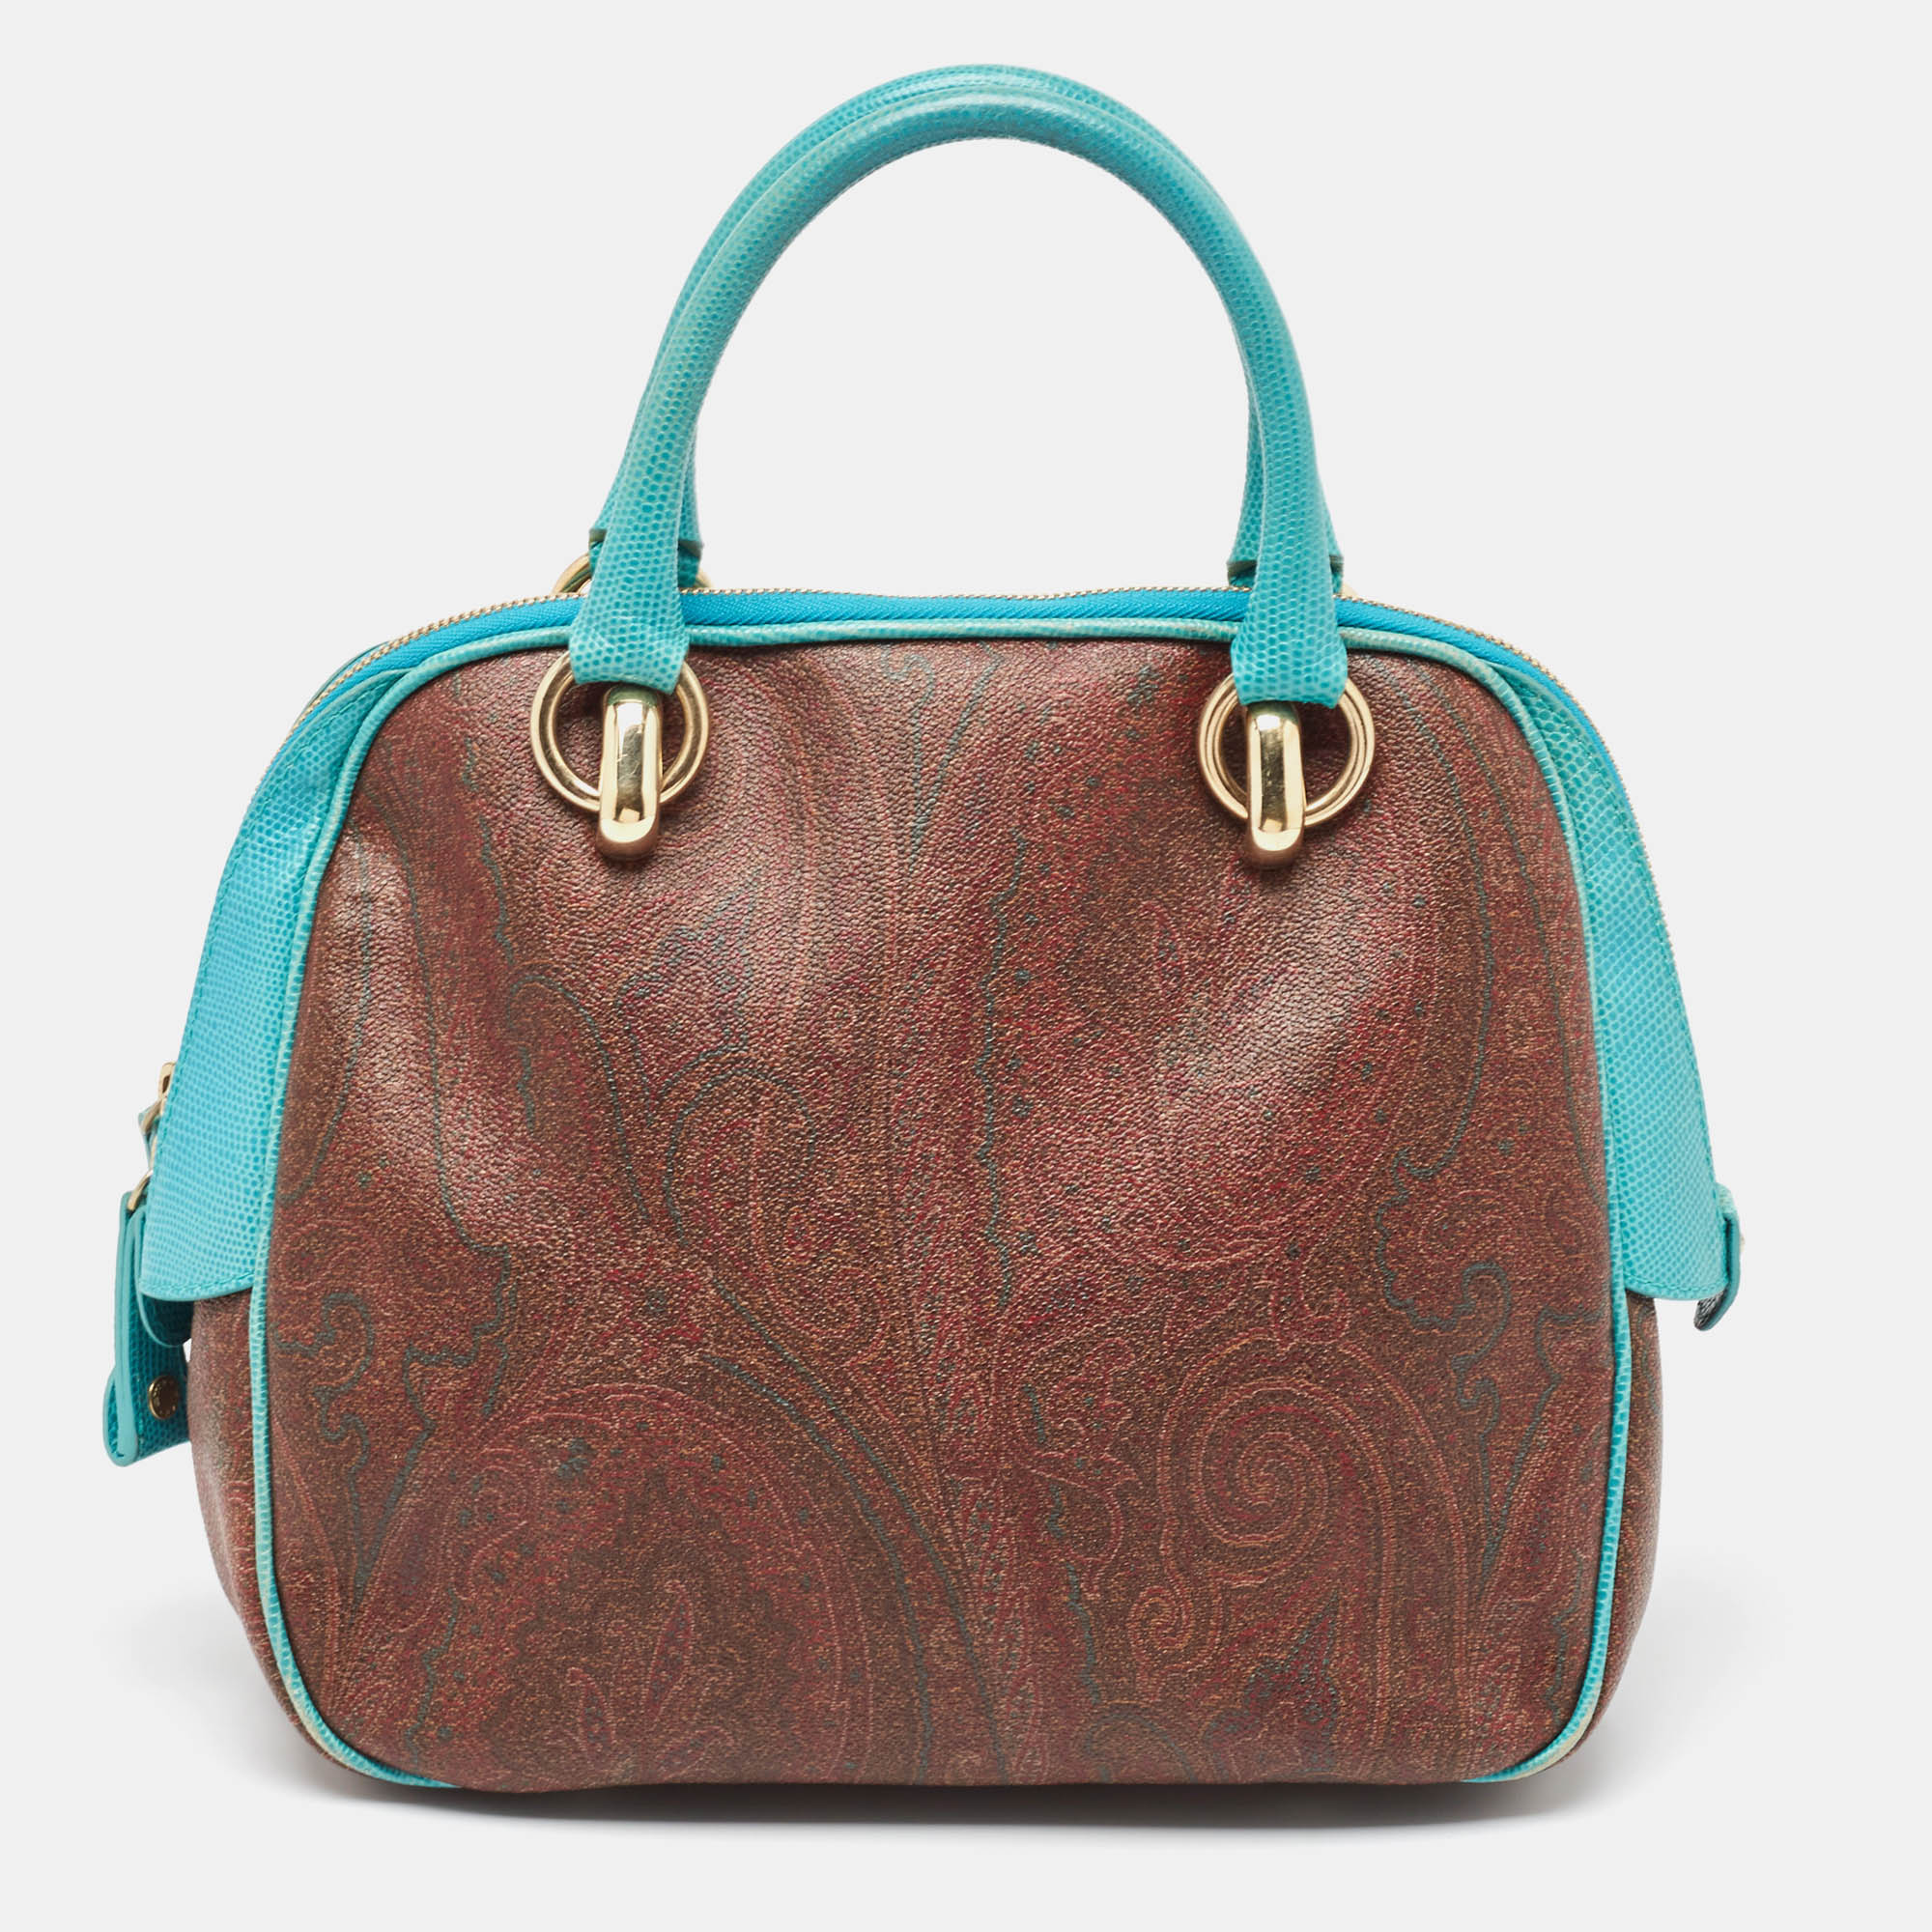 Etro brown/turquoise blue paisley coated canvas and lizard embossed leather satchel